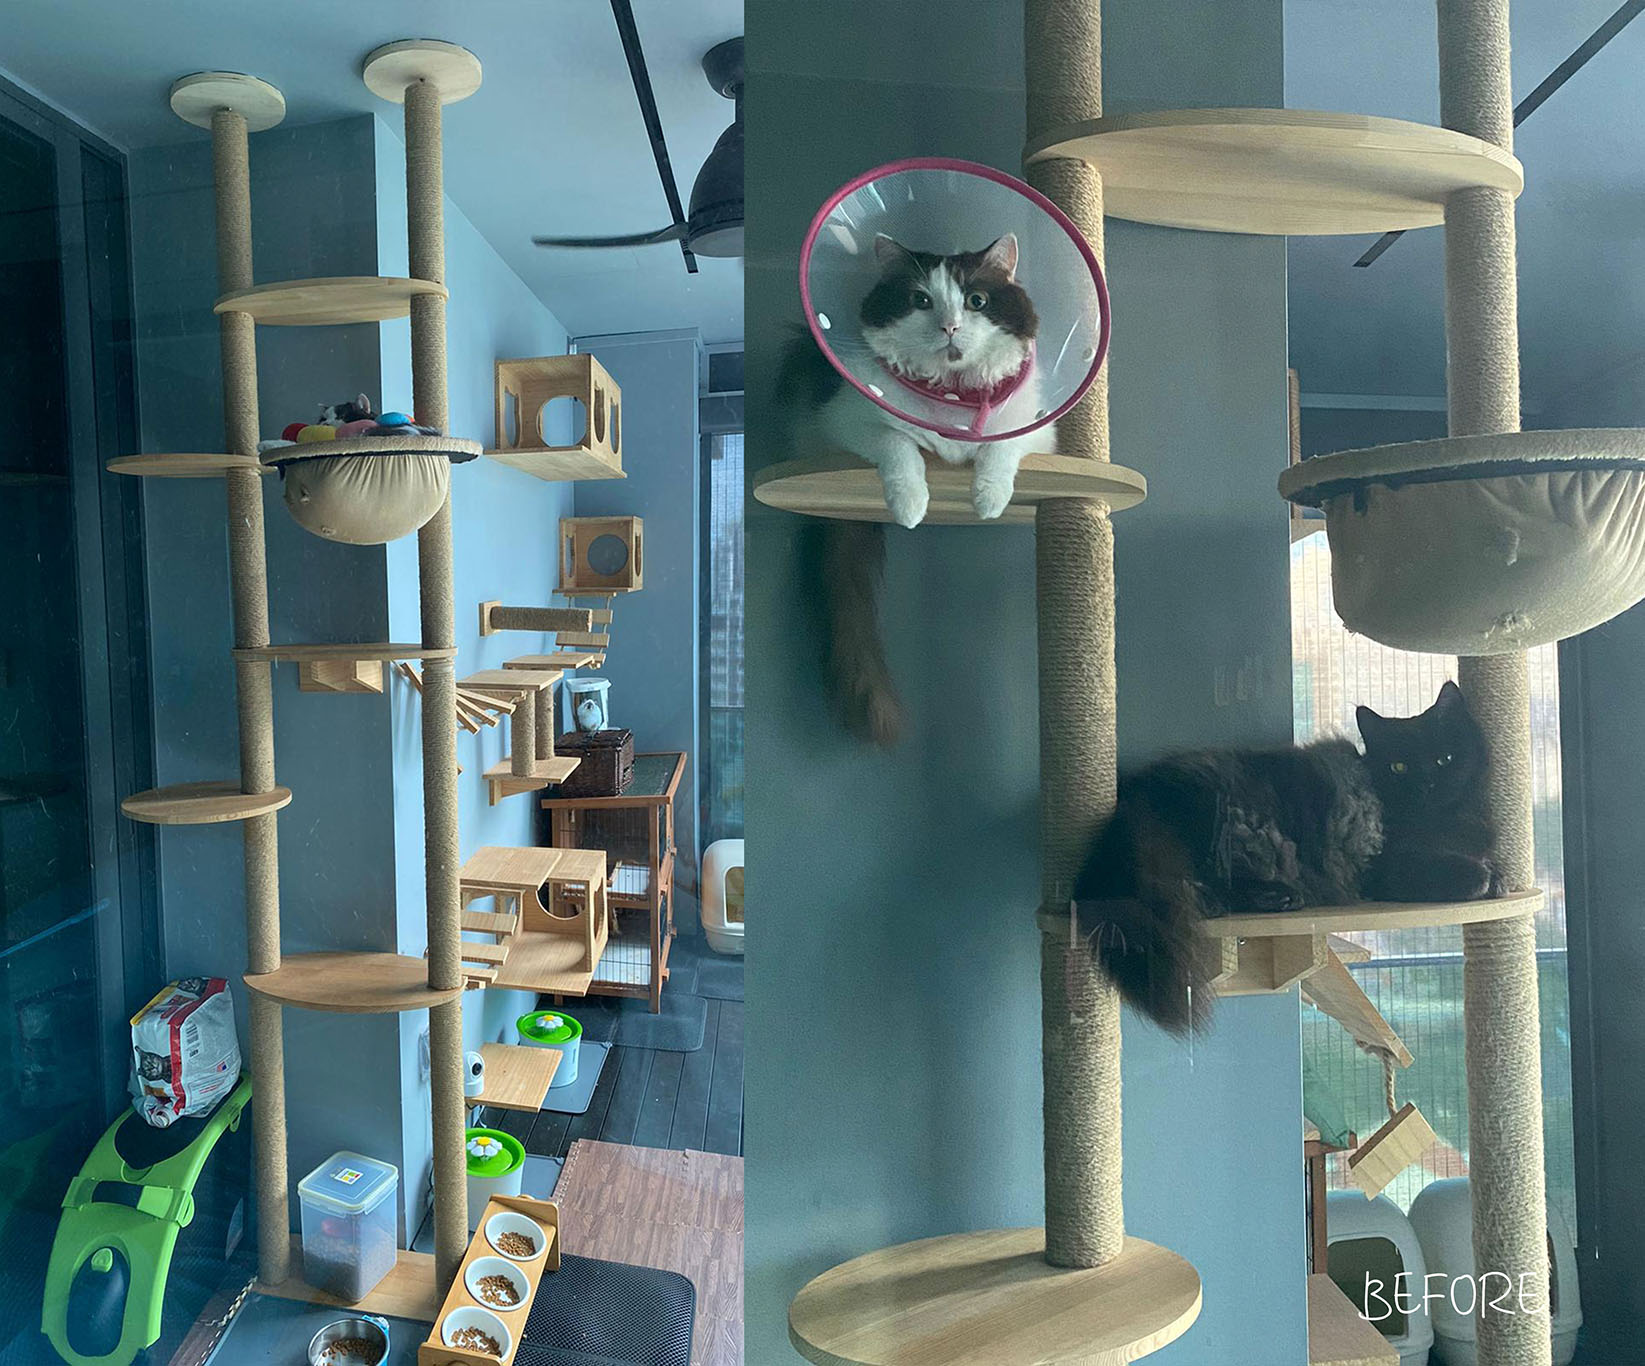 Before photo of their broken taobao cat gym